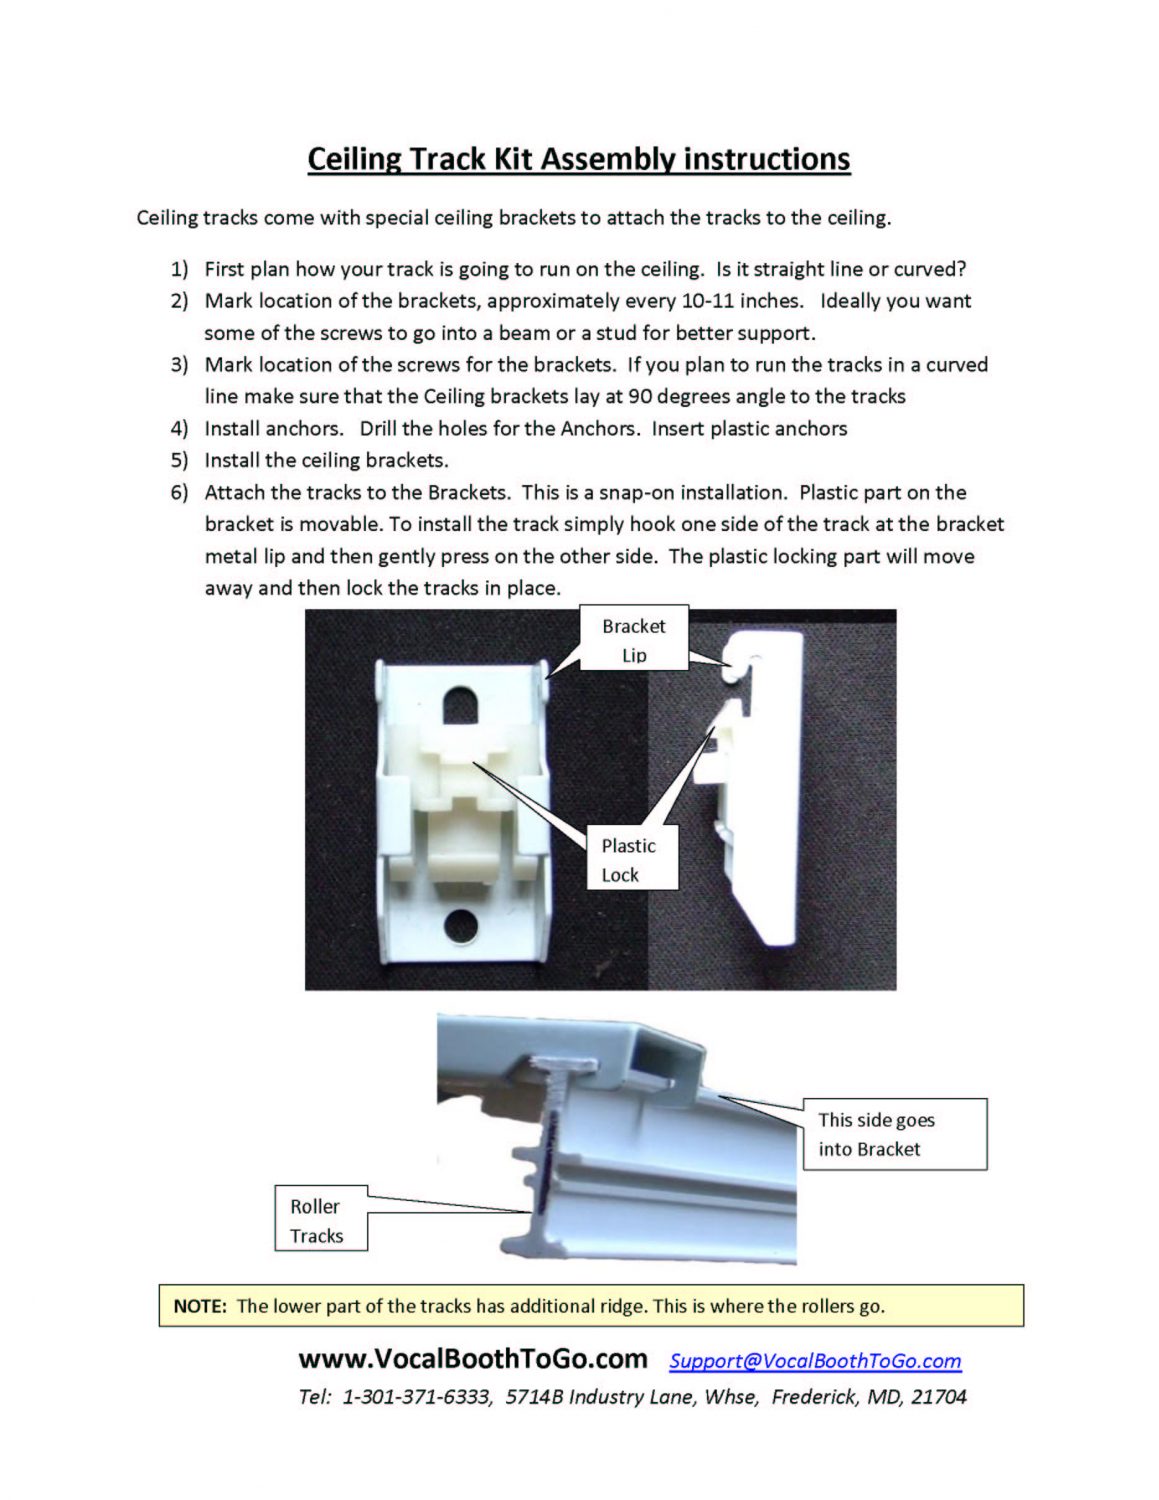 CEILING TRACK KIT INSTRUCTIONS AND PACKING LIST